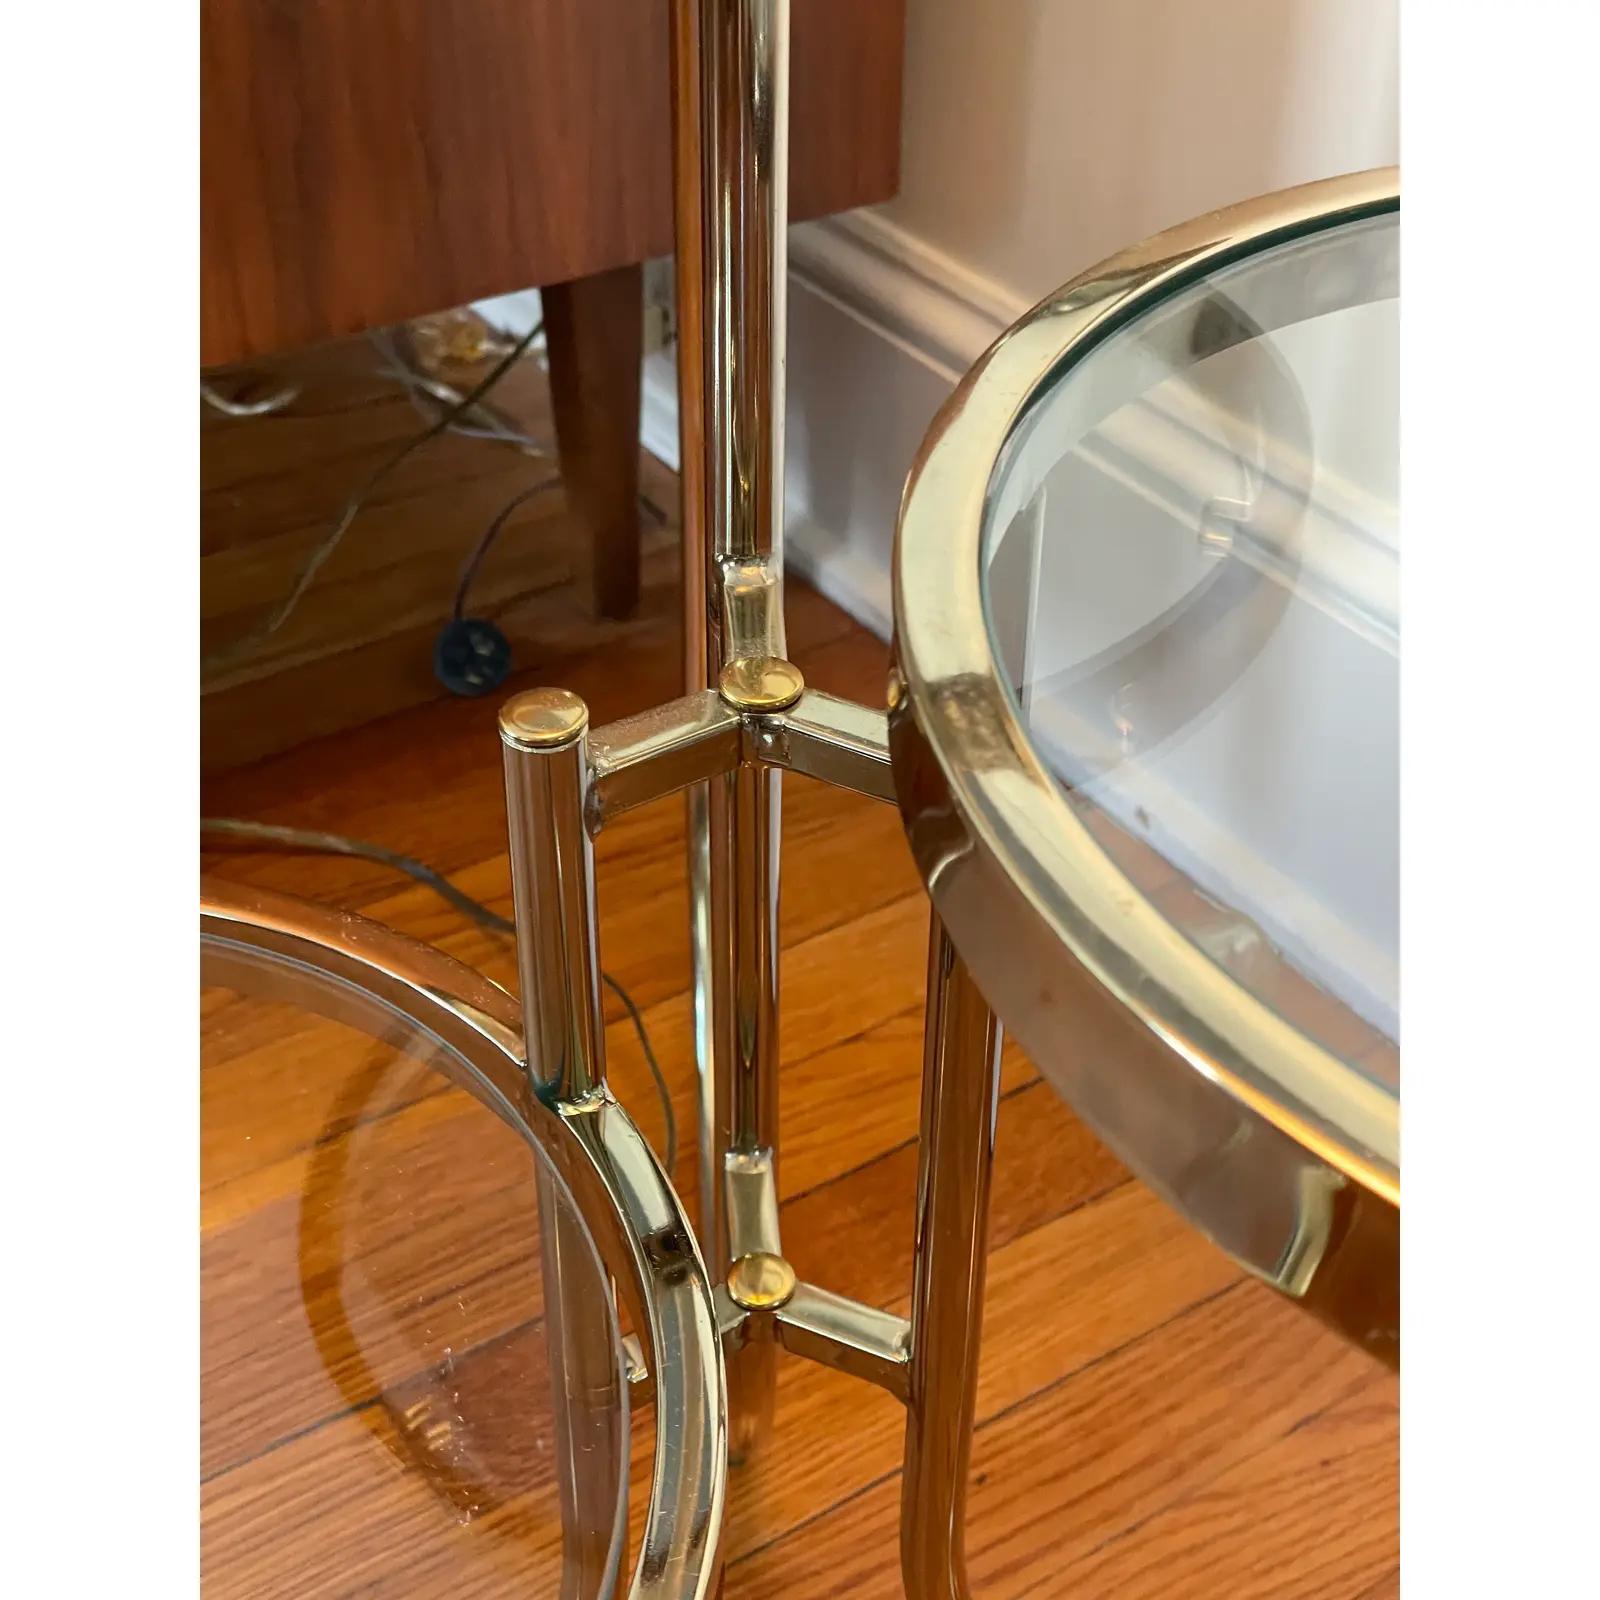 Unique mid century modern polished brass floor lamp with three round built in tables or stands. Great design and quality. 3 round glass tables.
Curbside to NYC/Philly $350